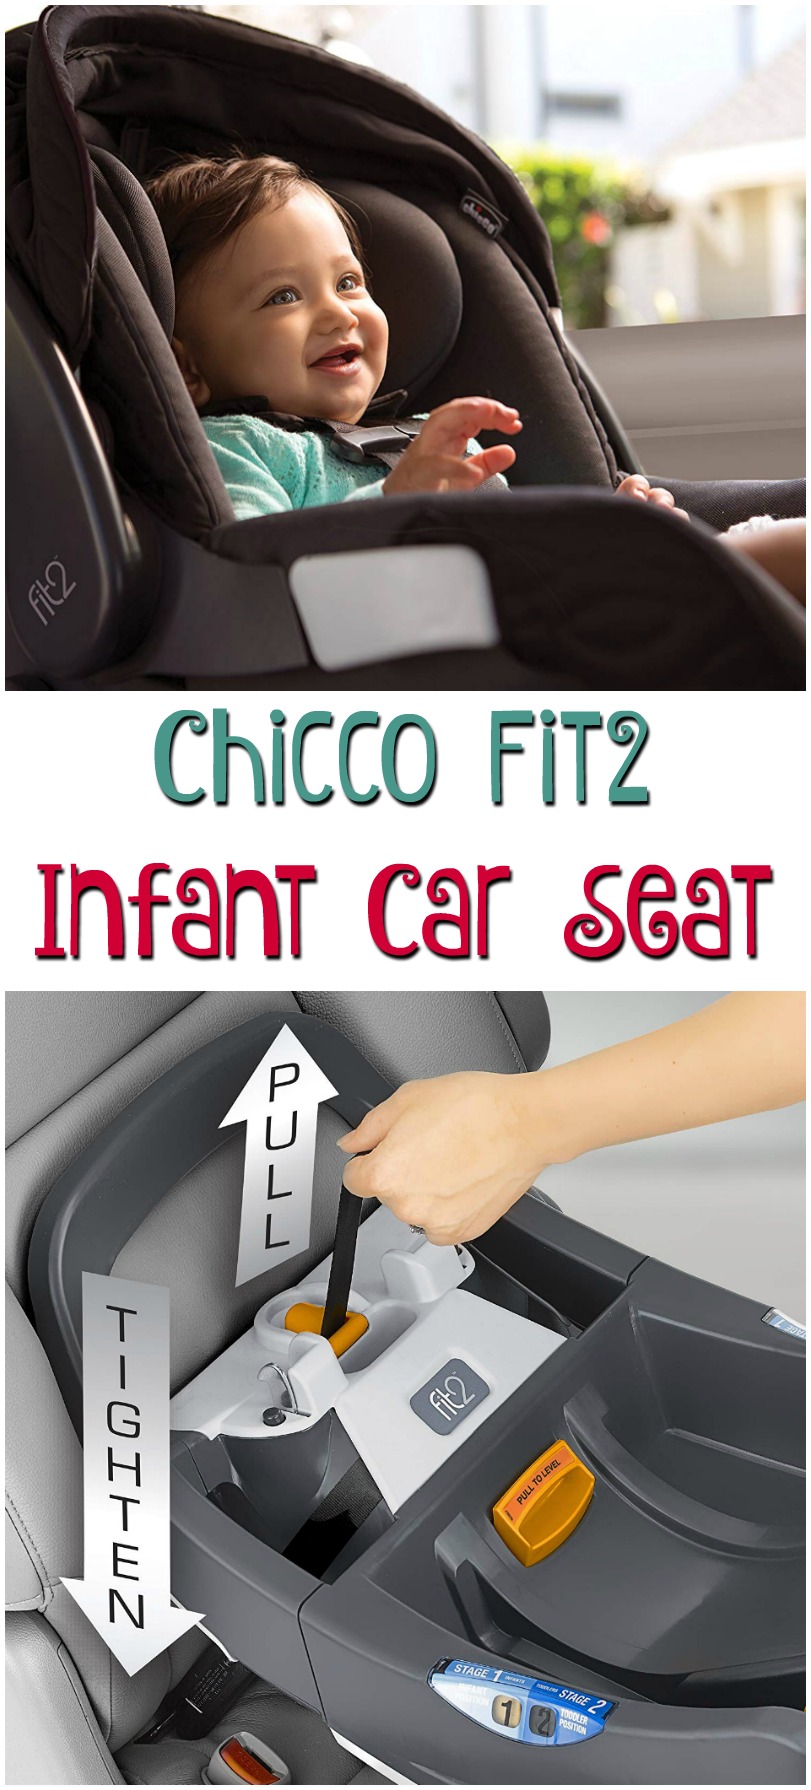 Chicco Fit2 Infant Car Seat Review And Guide For Moms #parenting #carseat #babies #infants #safety